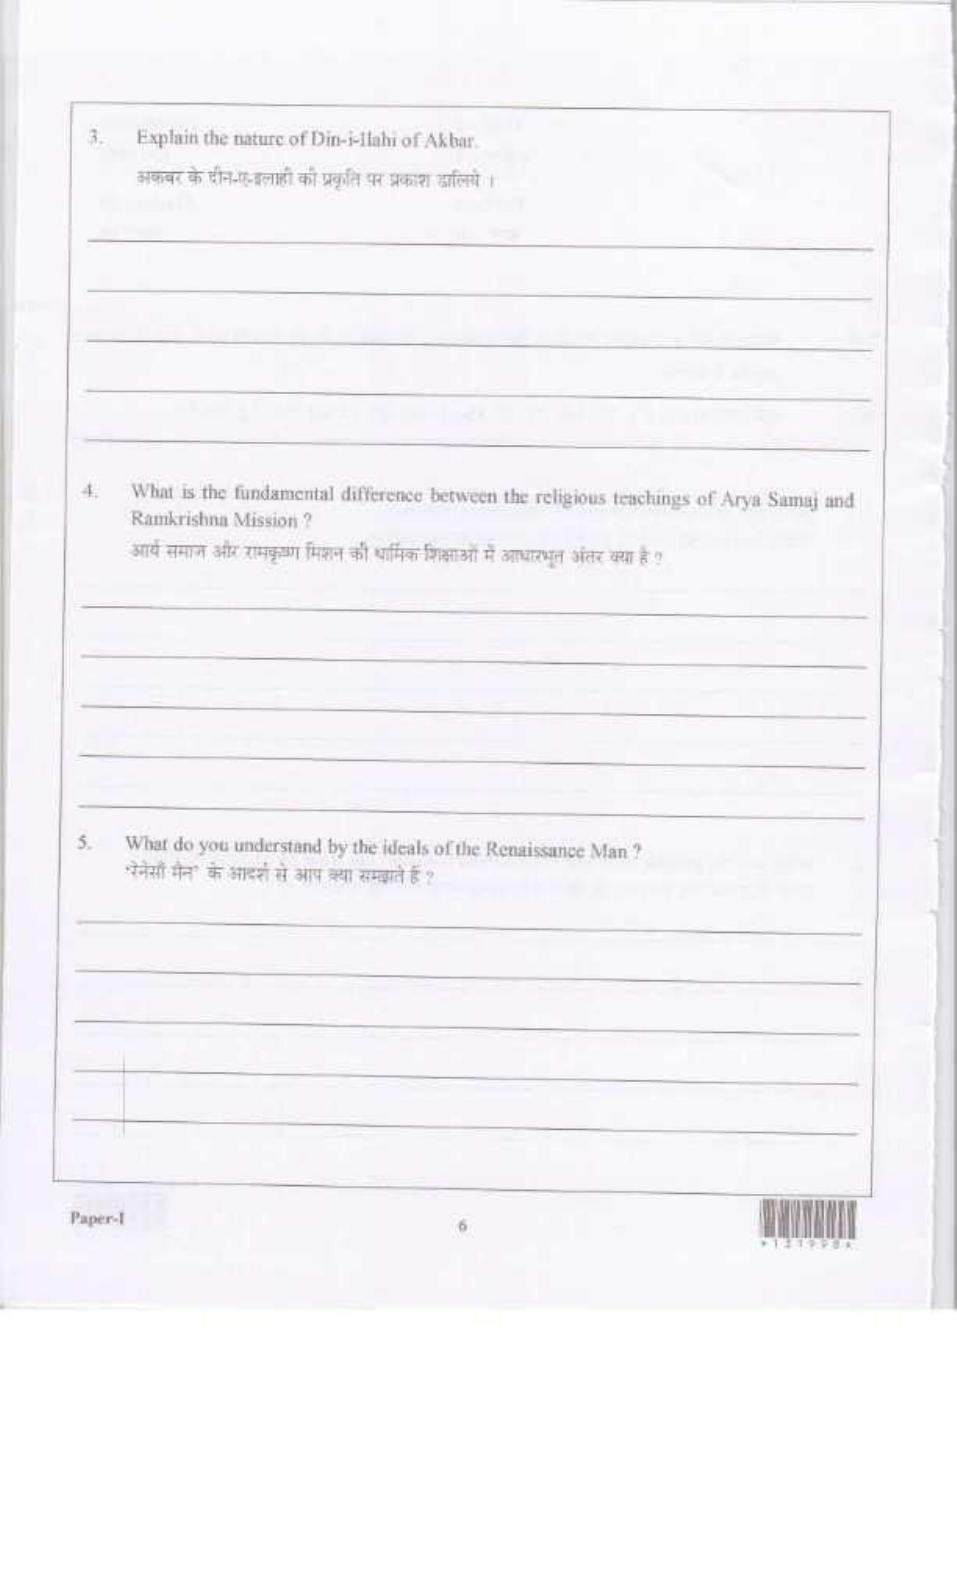 LUVAS Non-Teaching Sample Papers - Socio-Economic and Experience - Page 6